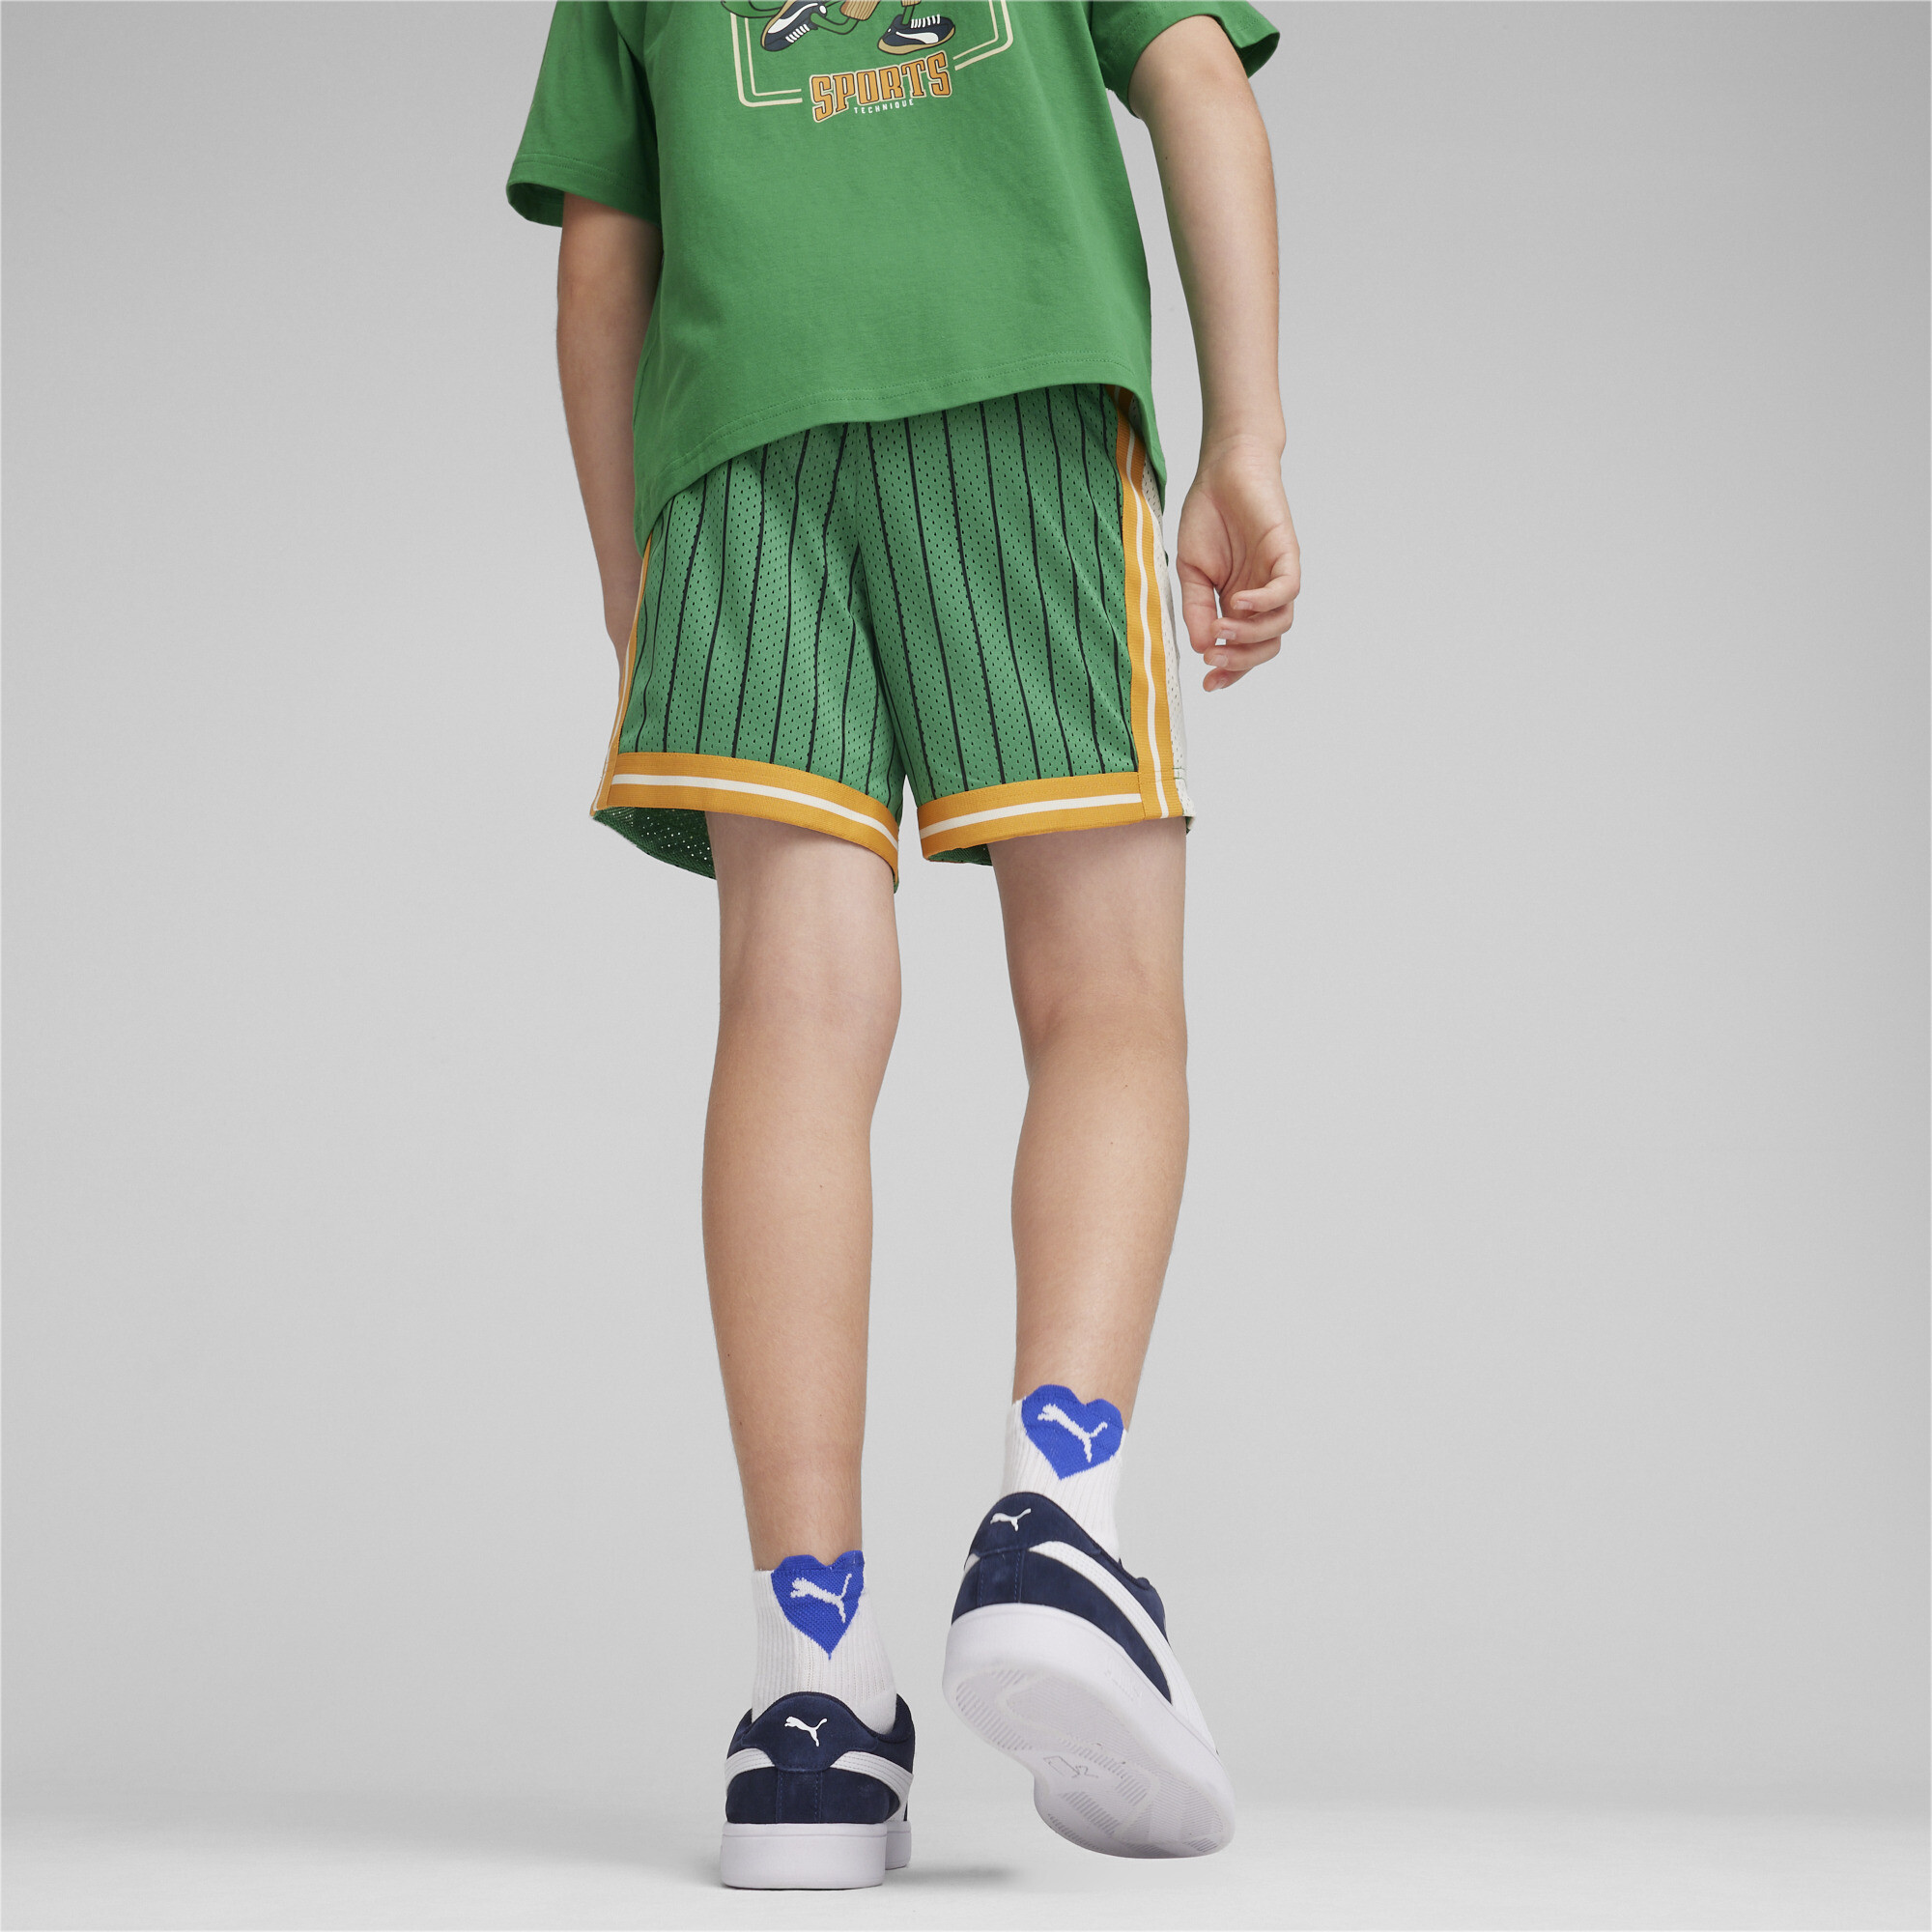 PUMA For The Fanbase Basketball Shorts In Green, Size 7-8 Youth